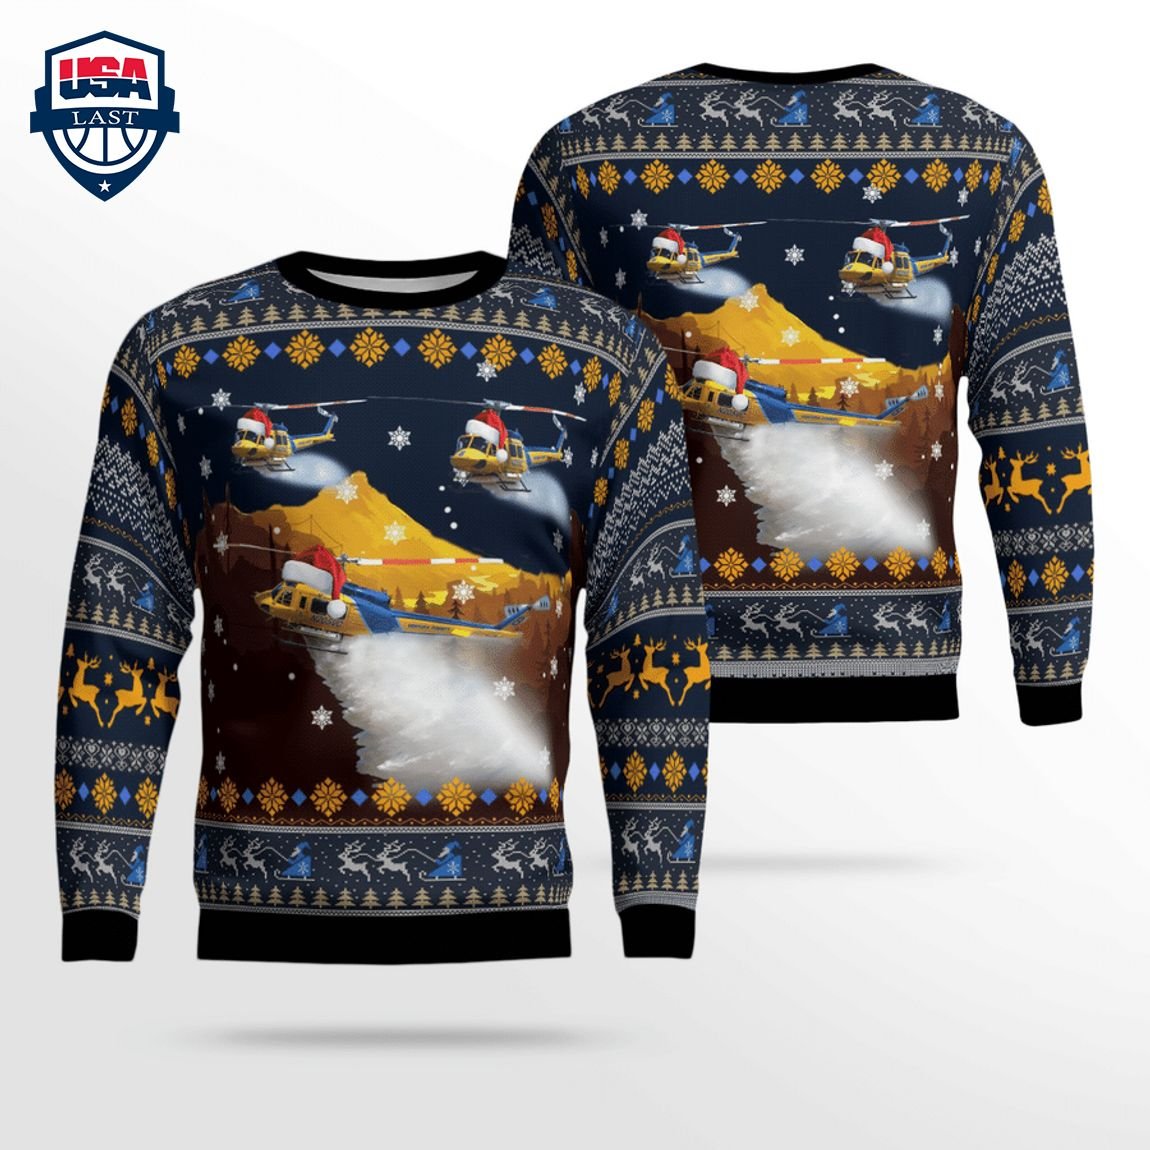 Ventura County Sheriff Fire Support Bell 205A-1 3D Christmas Sweater
Link to buy: usalast.com/cross/ventura-…
#VenturaCountySheriffFireSupport #Bell205A1 #3D #Christmas #Sweater